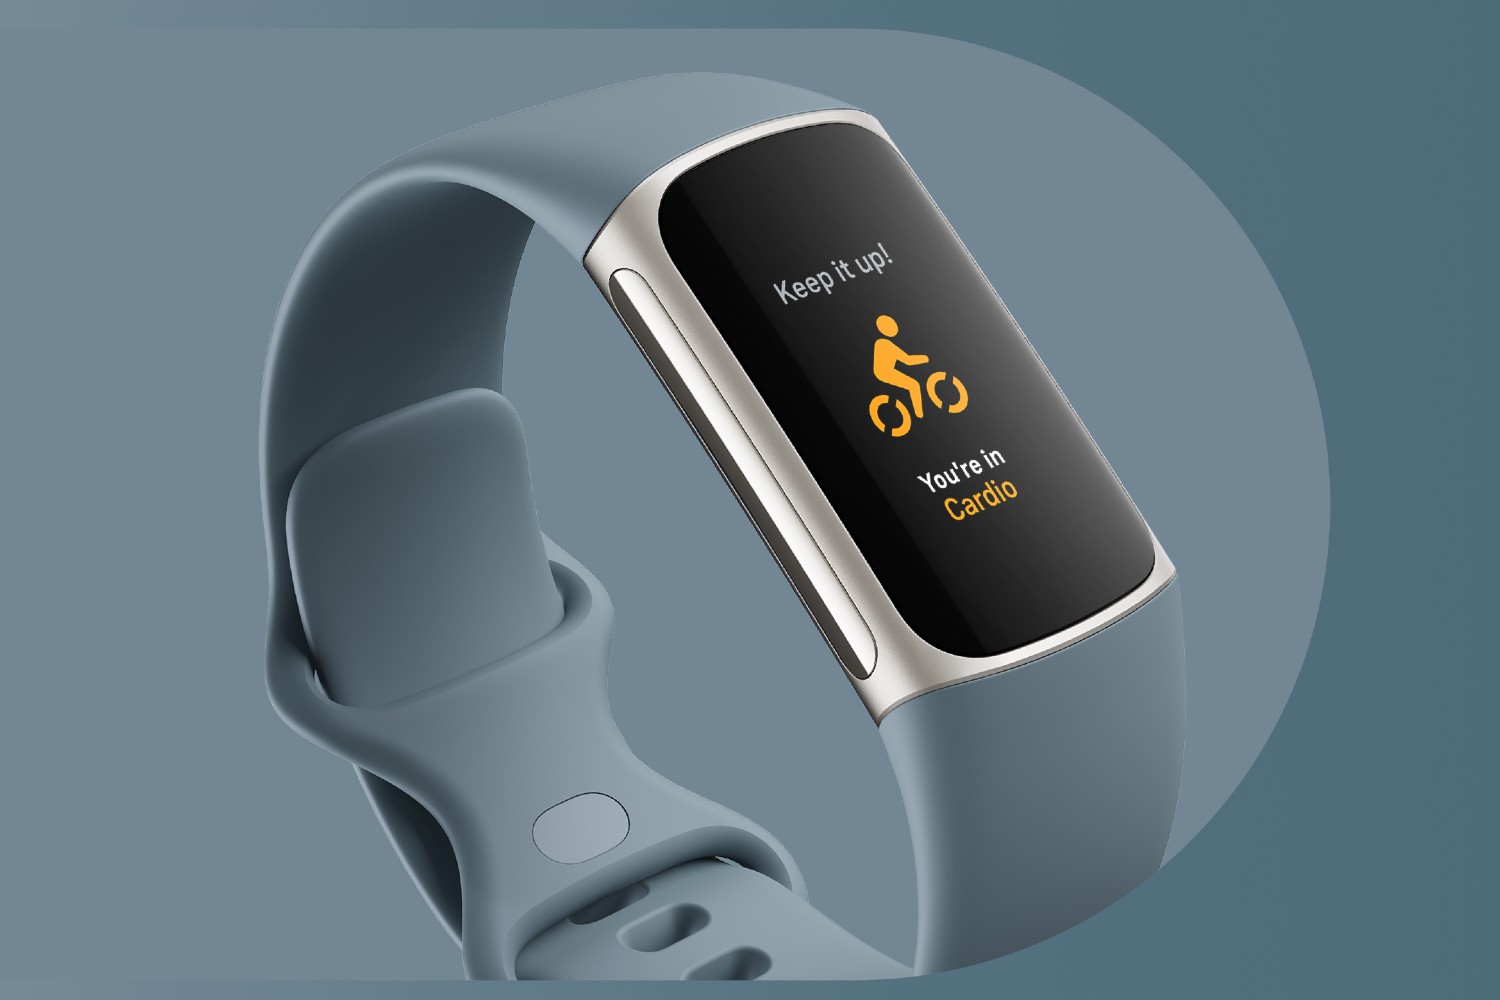 Måne skammel kutter What is a Fitness Tracker and Do You Need One? - The Manual